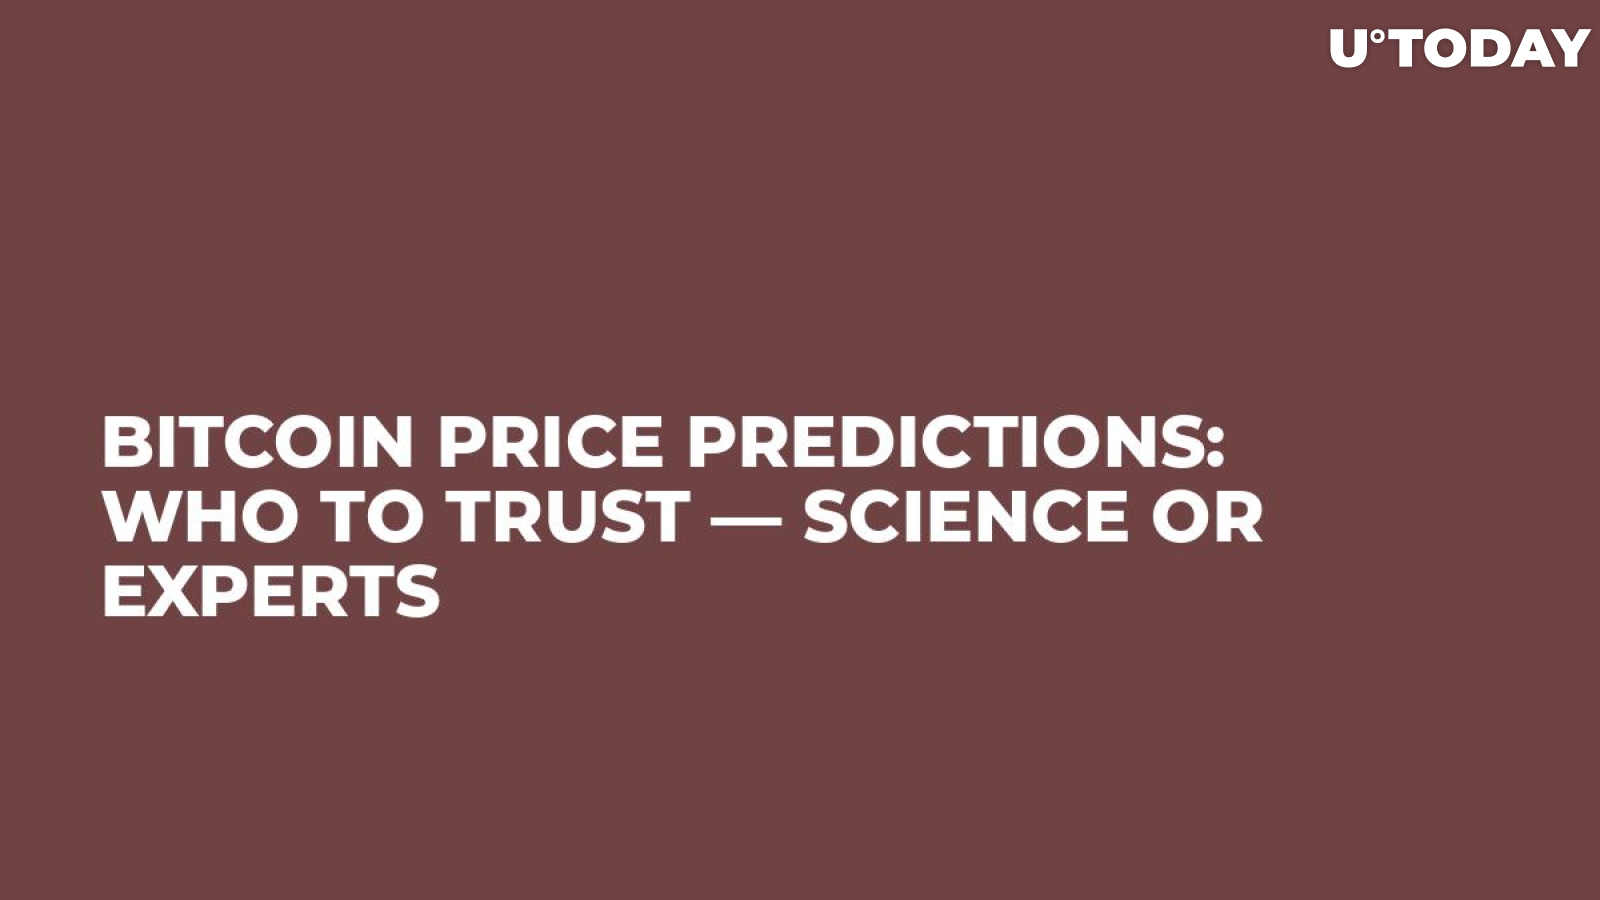 Bitcoin Price Predictions: Who to Trust — Science or Experts